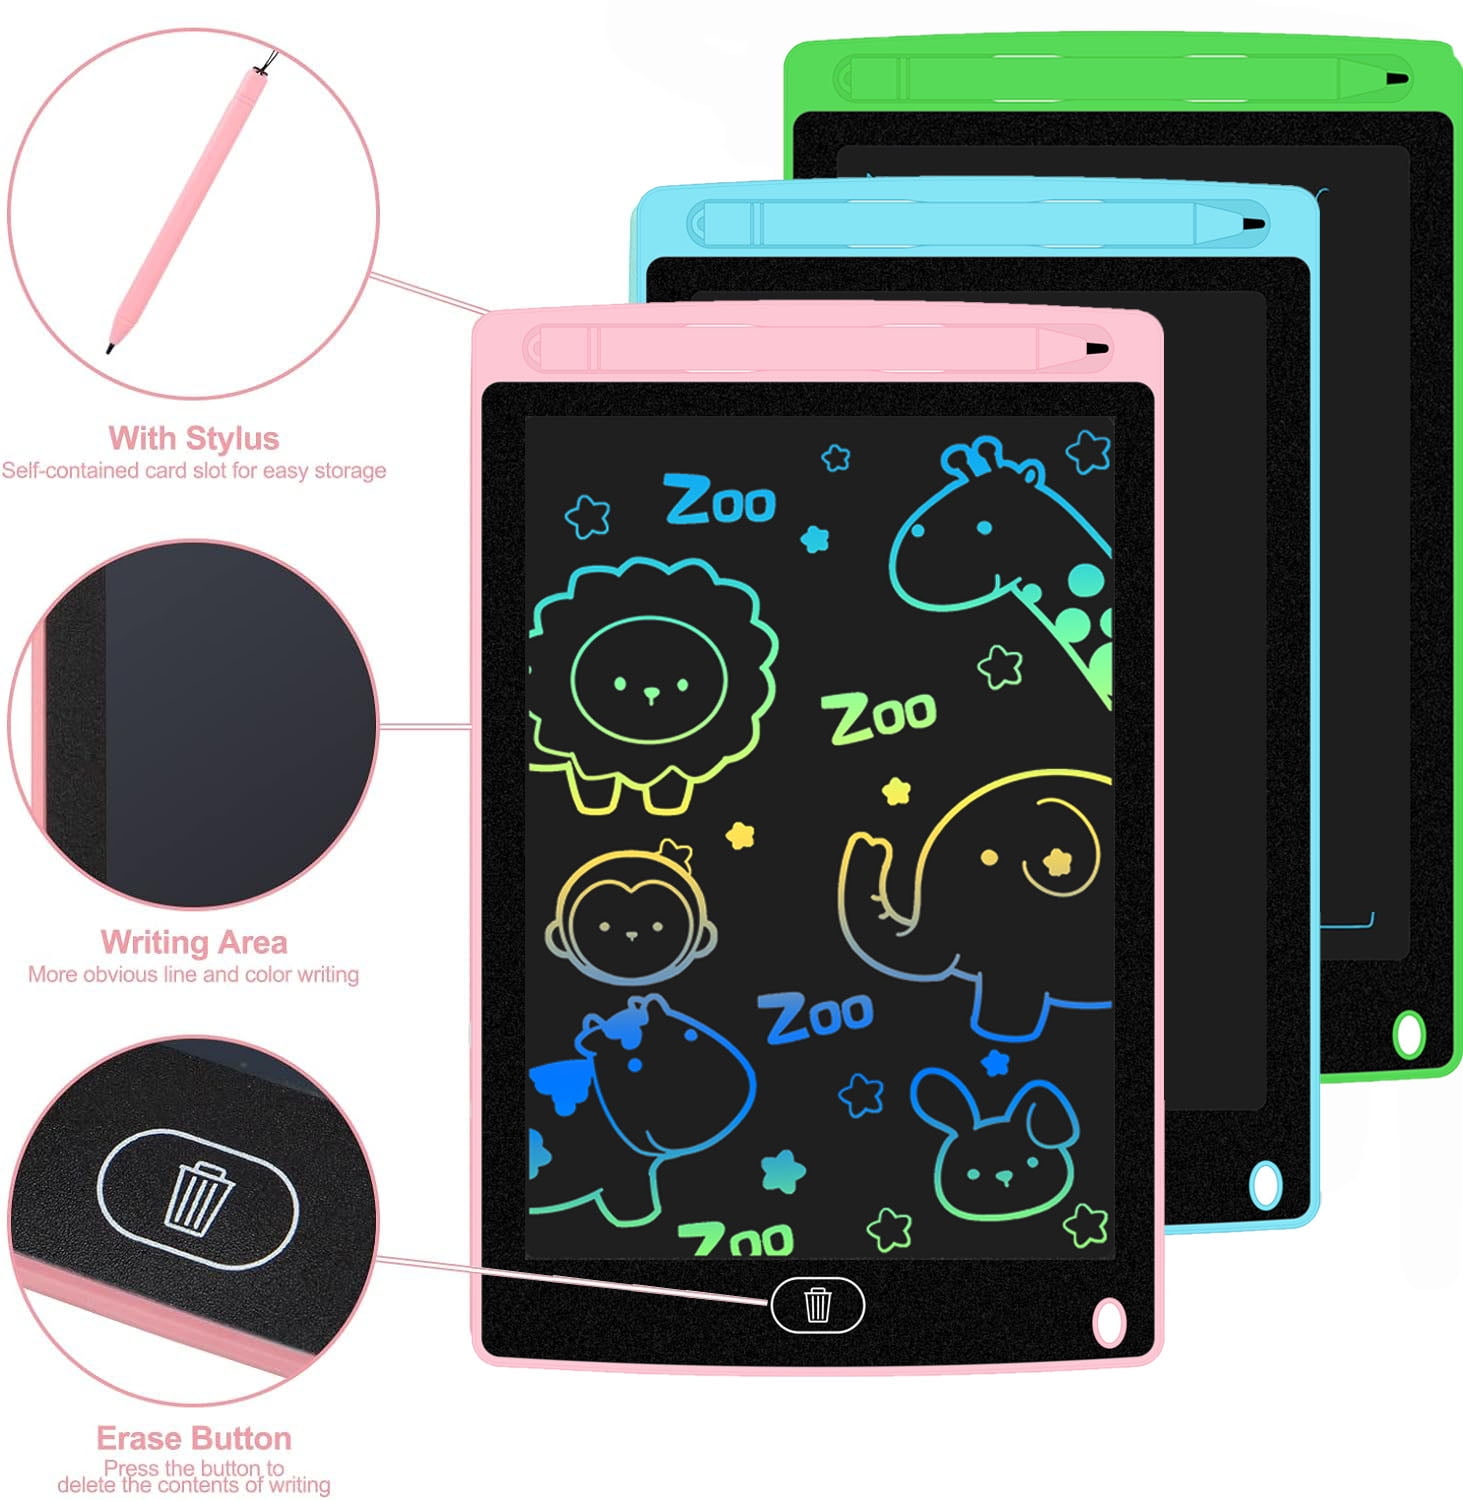 Adofi LCD Writing Tablet, 8.5-Inch Color Kids Tablet Doodle Board, Electronic Drawing Board Graphics for Kids and Adults at Home, School, Office